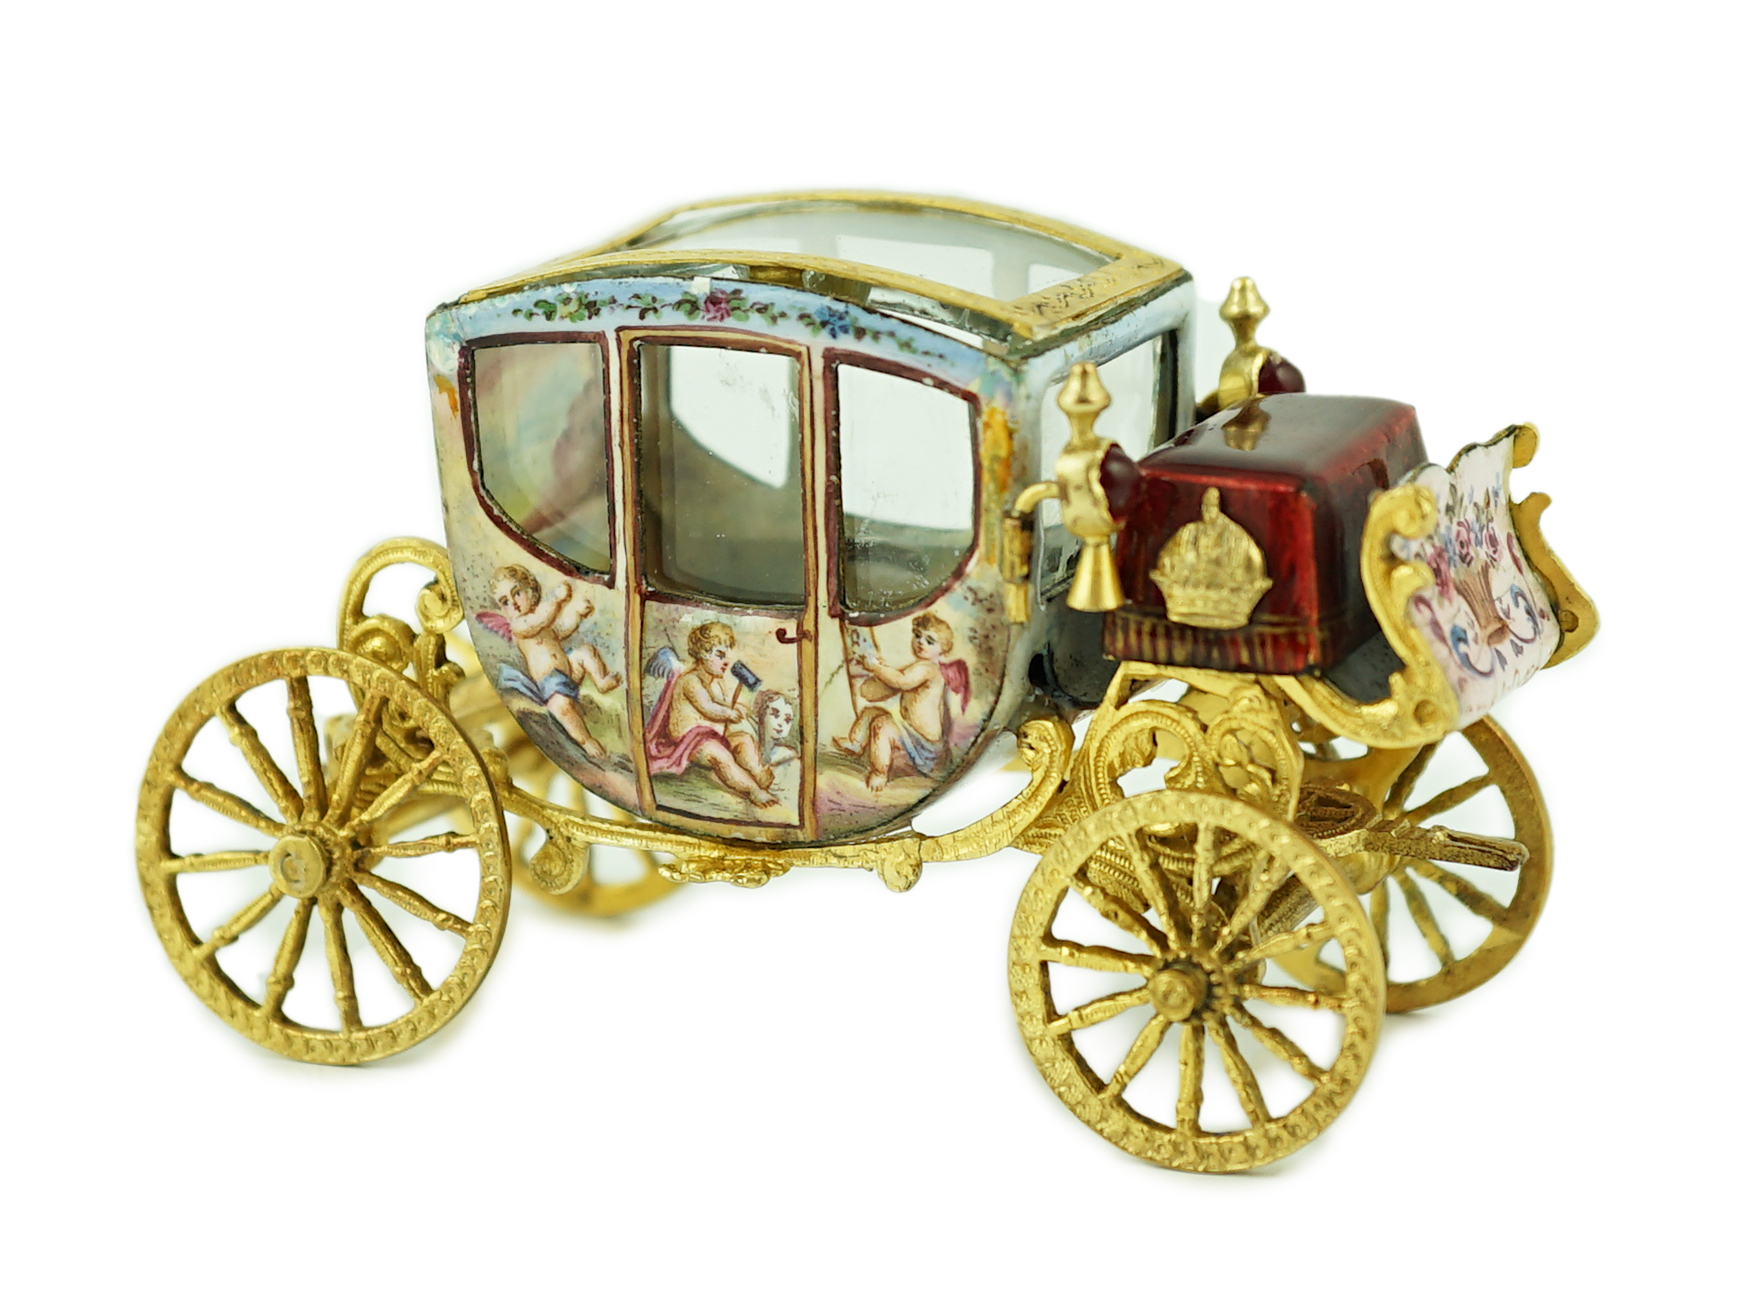 An early 20th century Viennese silver gilt and enamel miniature model of carriage, by Ludwig Pollitzer?